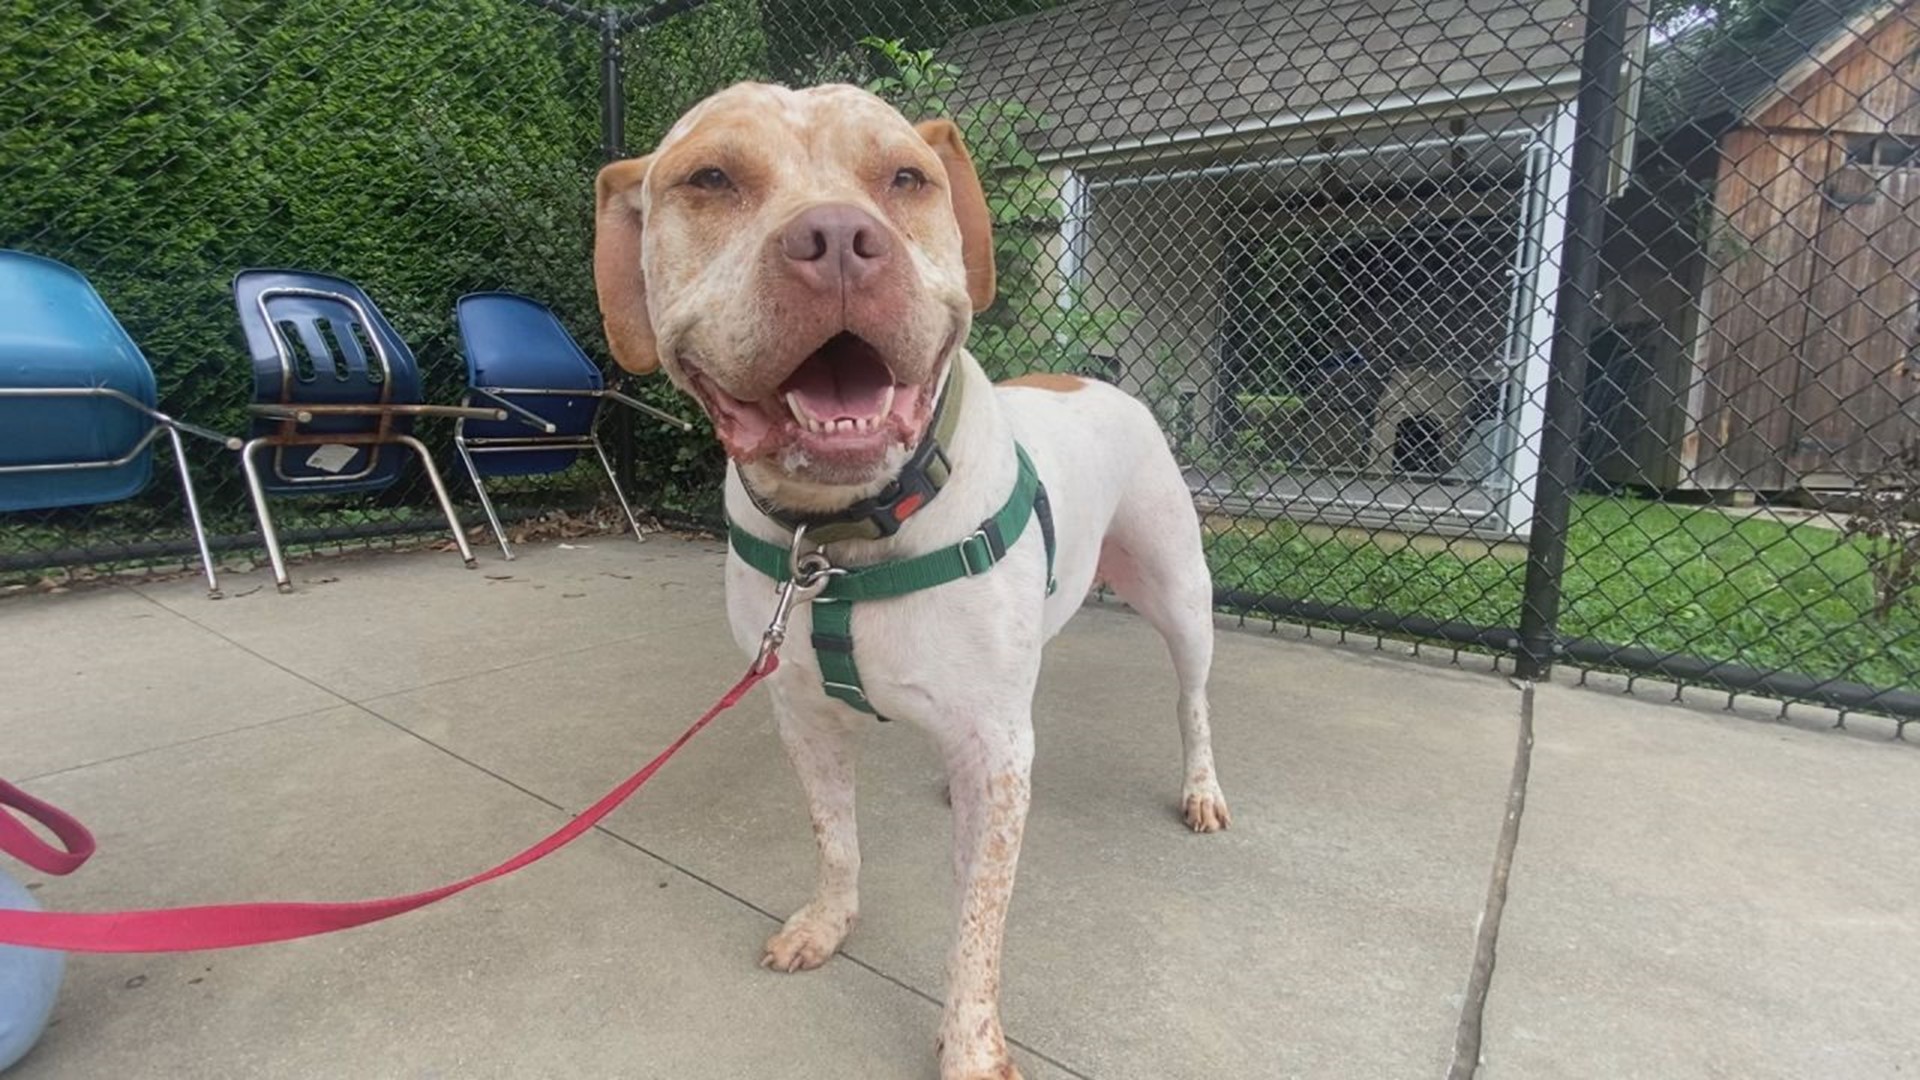 Atlas is described as a big marshmallow by the shelter. He's an 8-year-old, mixed breed dog looking for a family at the PSPCA Lancaster Center.